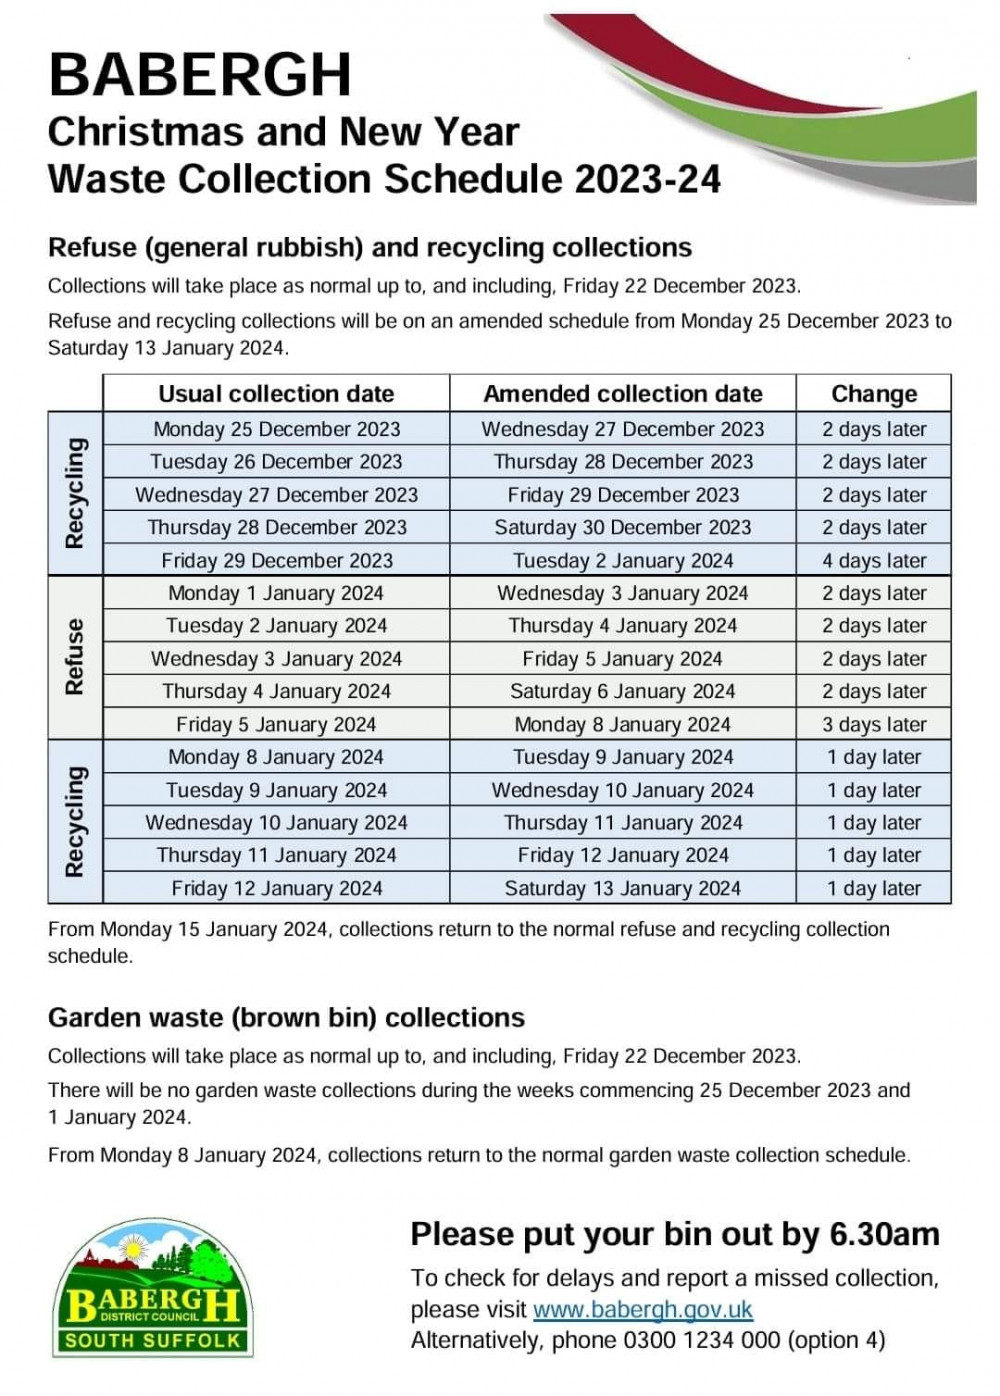 Your updated bin collection days